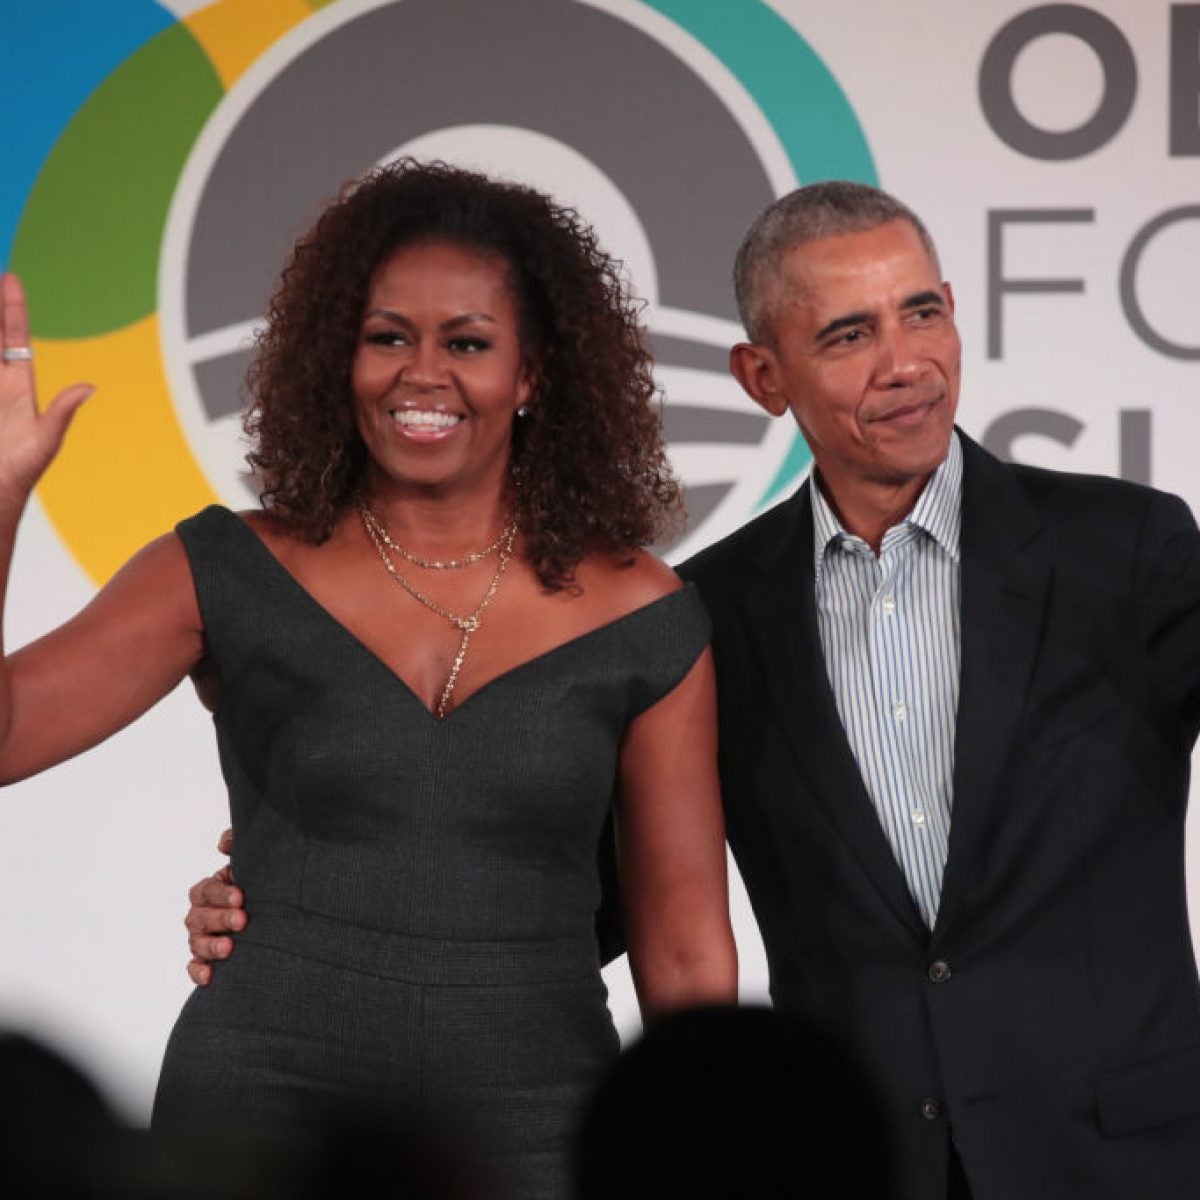 Barack and Michelle Obama To Give Virtual Commencement Address To Graduating Seniors